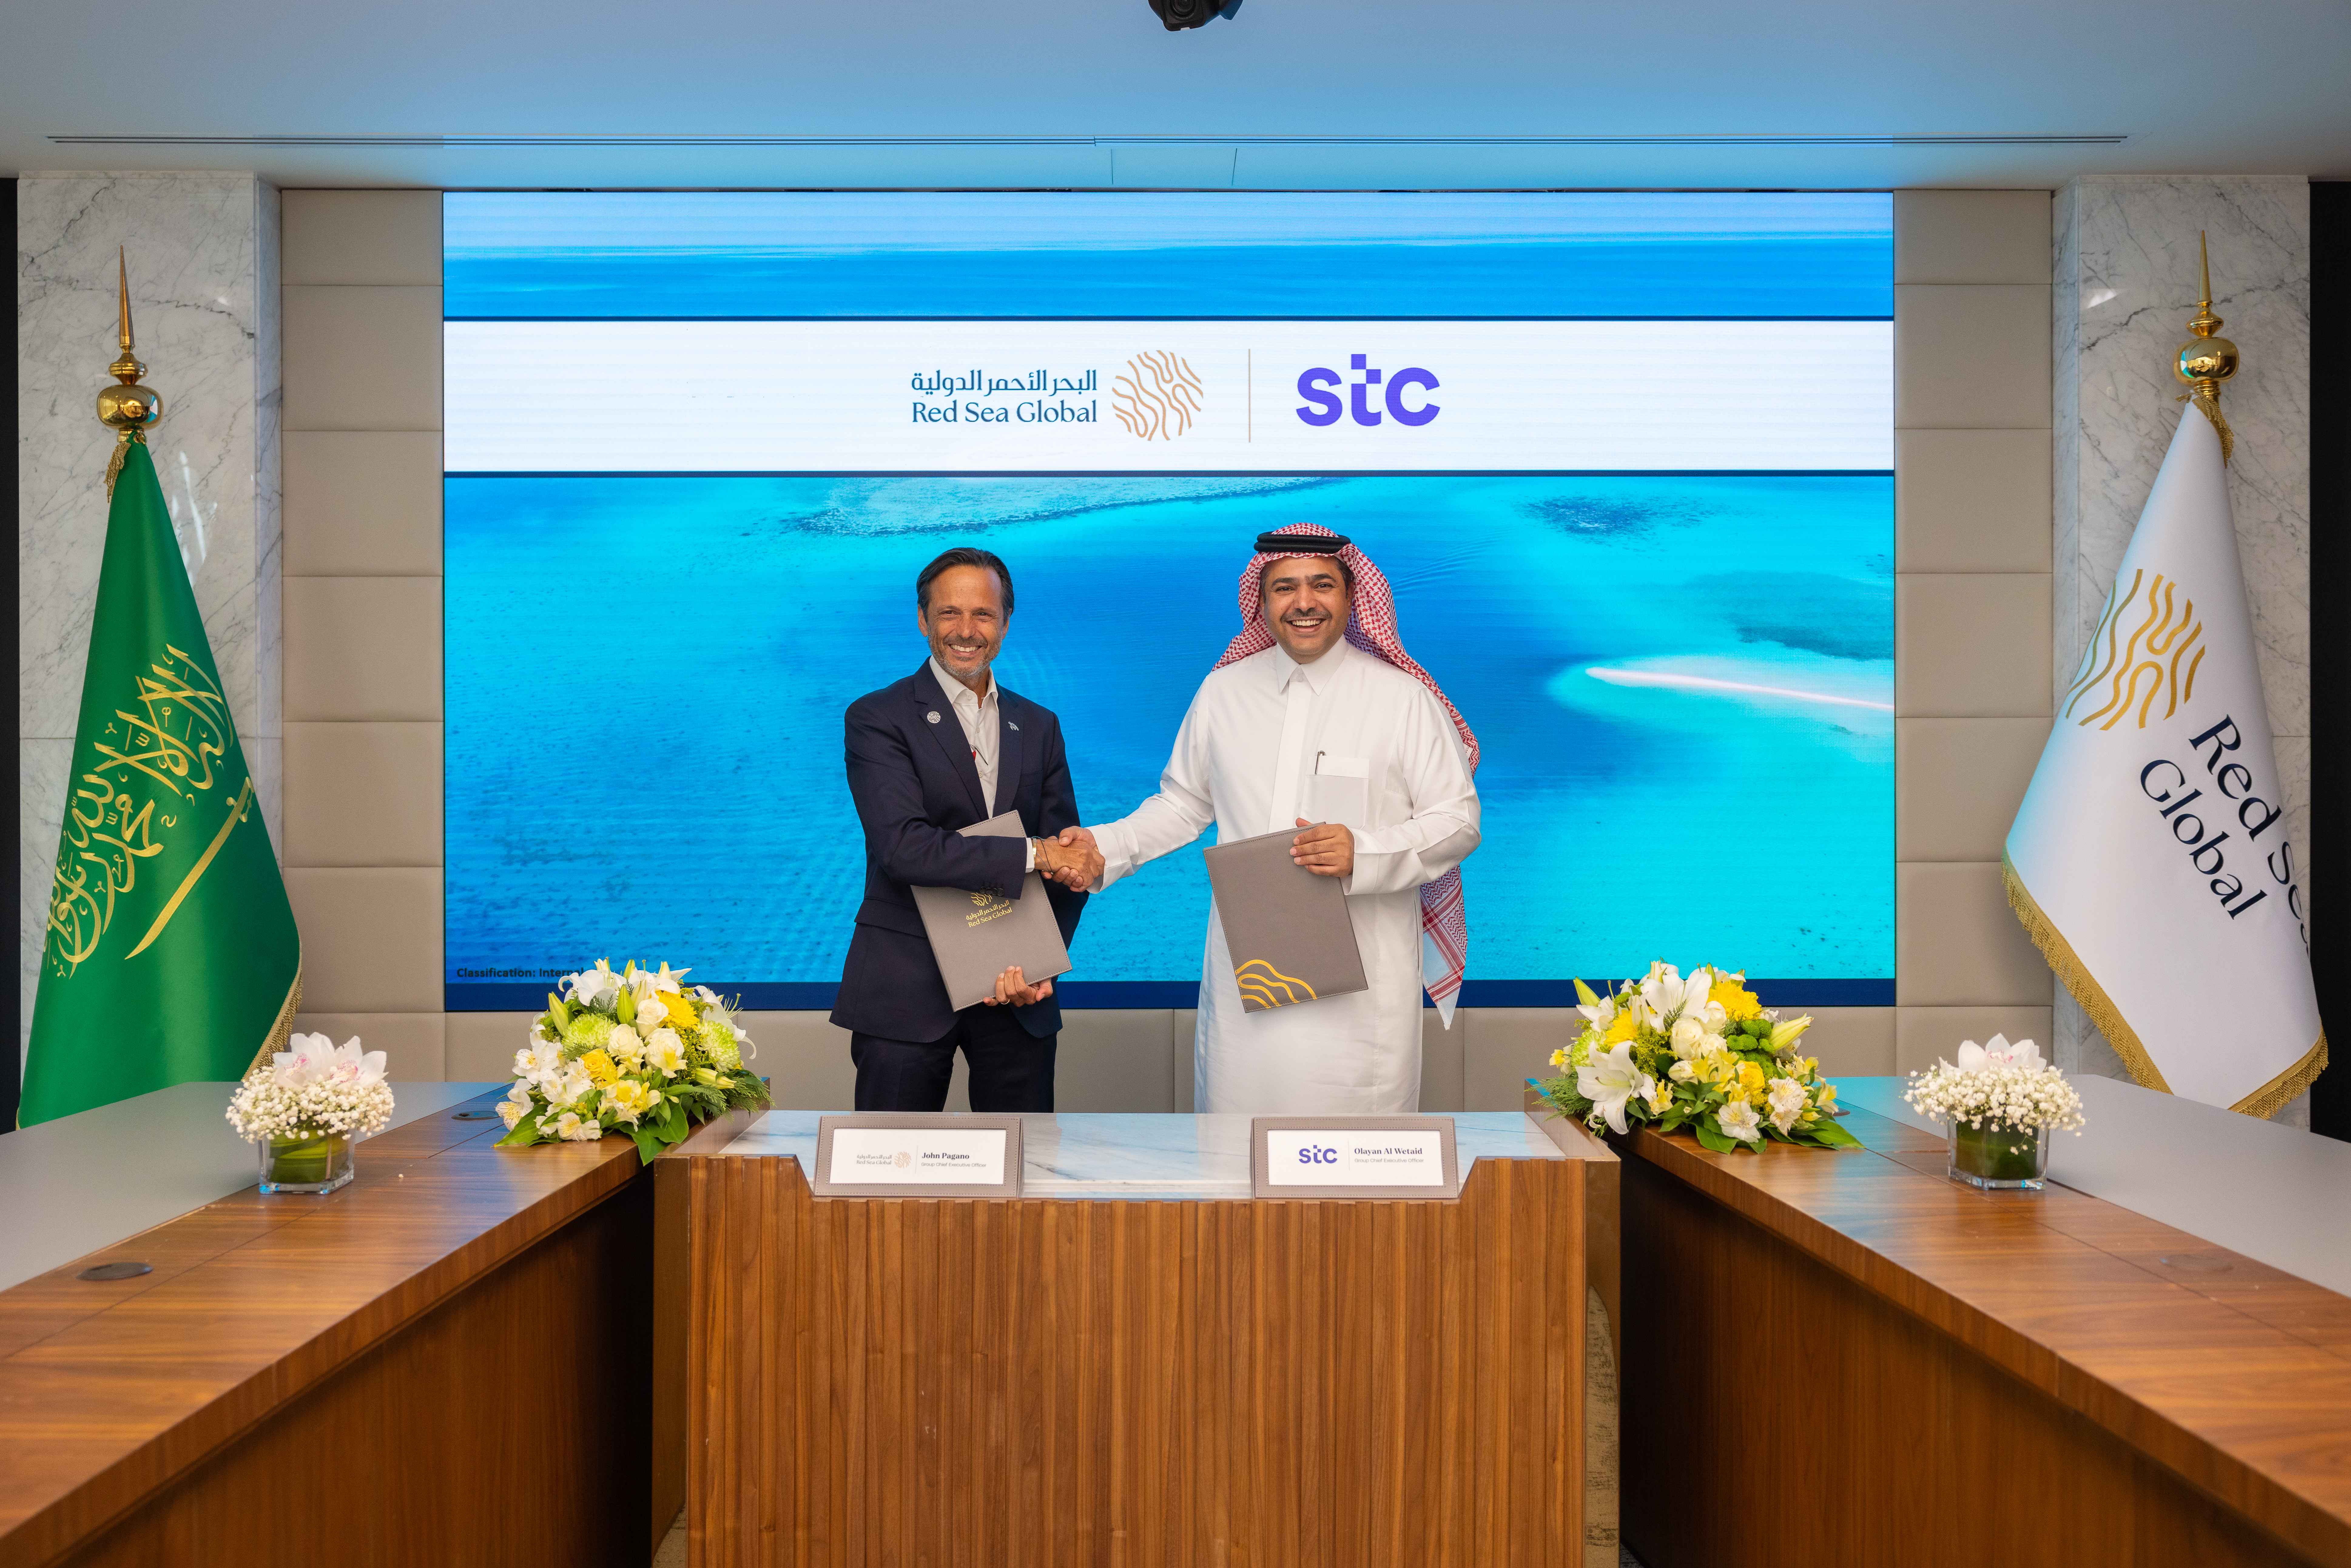 stc group and Red Sea Global sign a strategic partnership to drive the digital success of RSG destinations